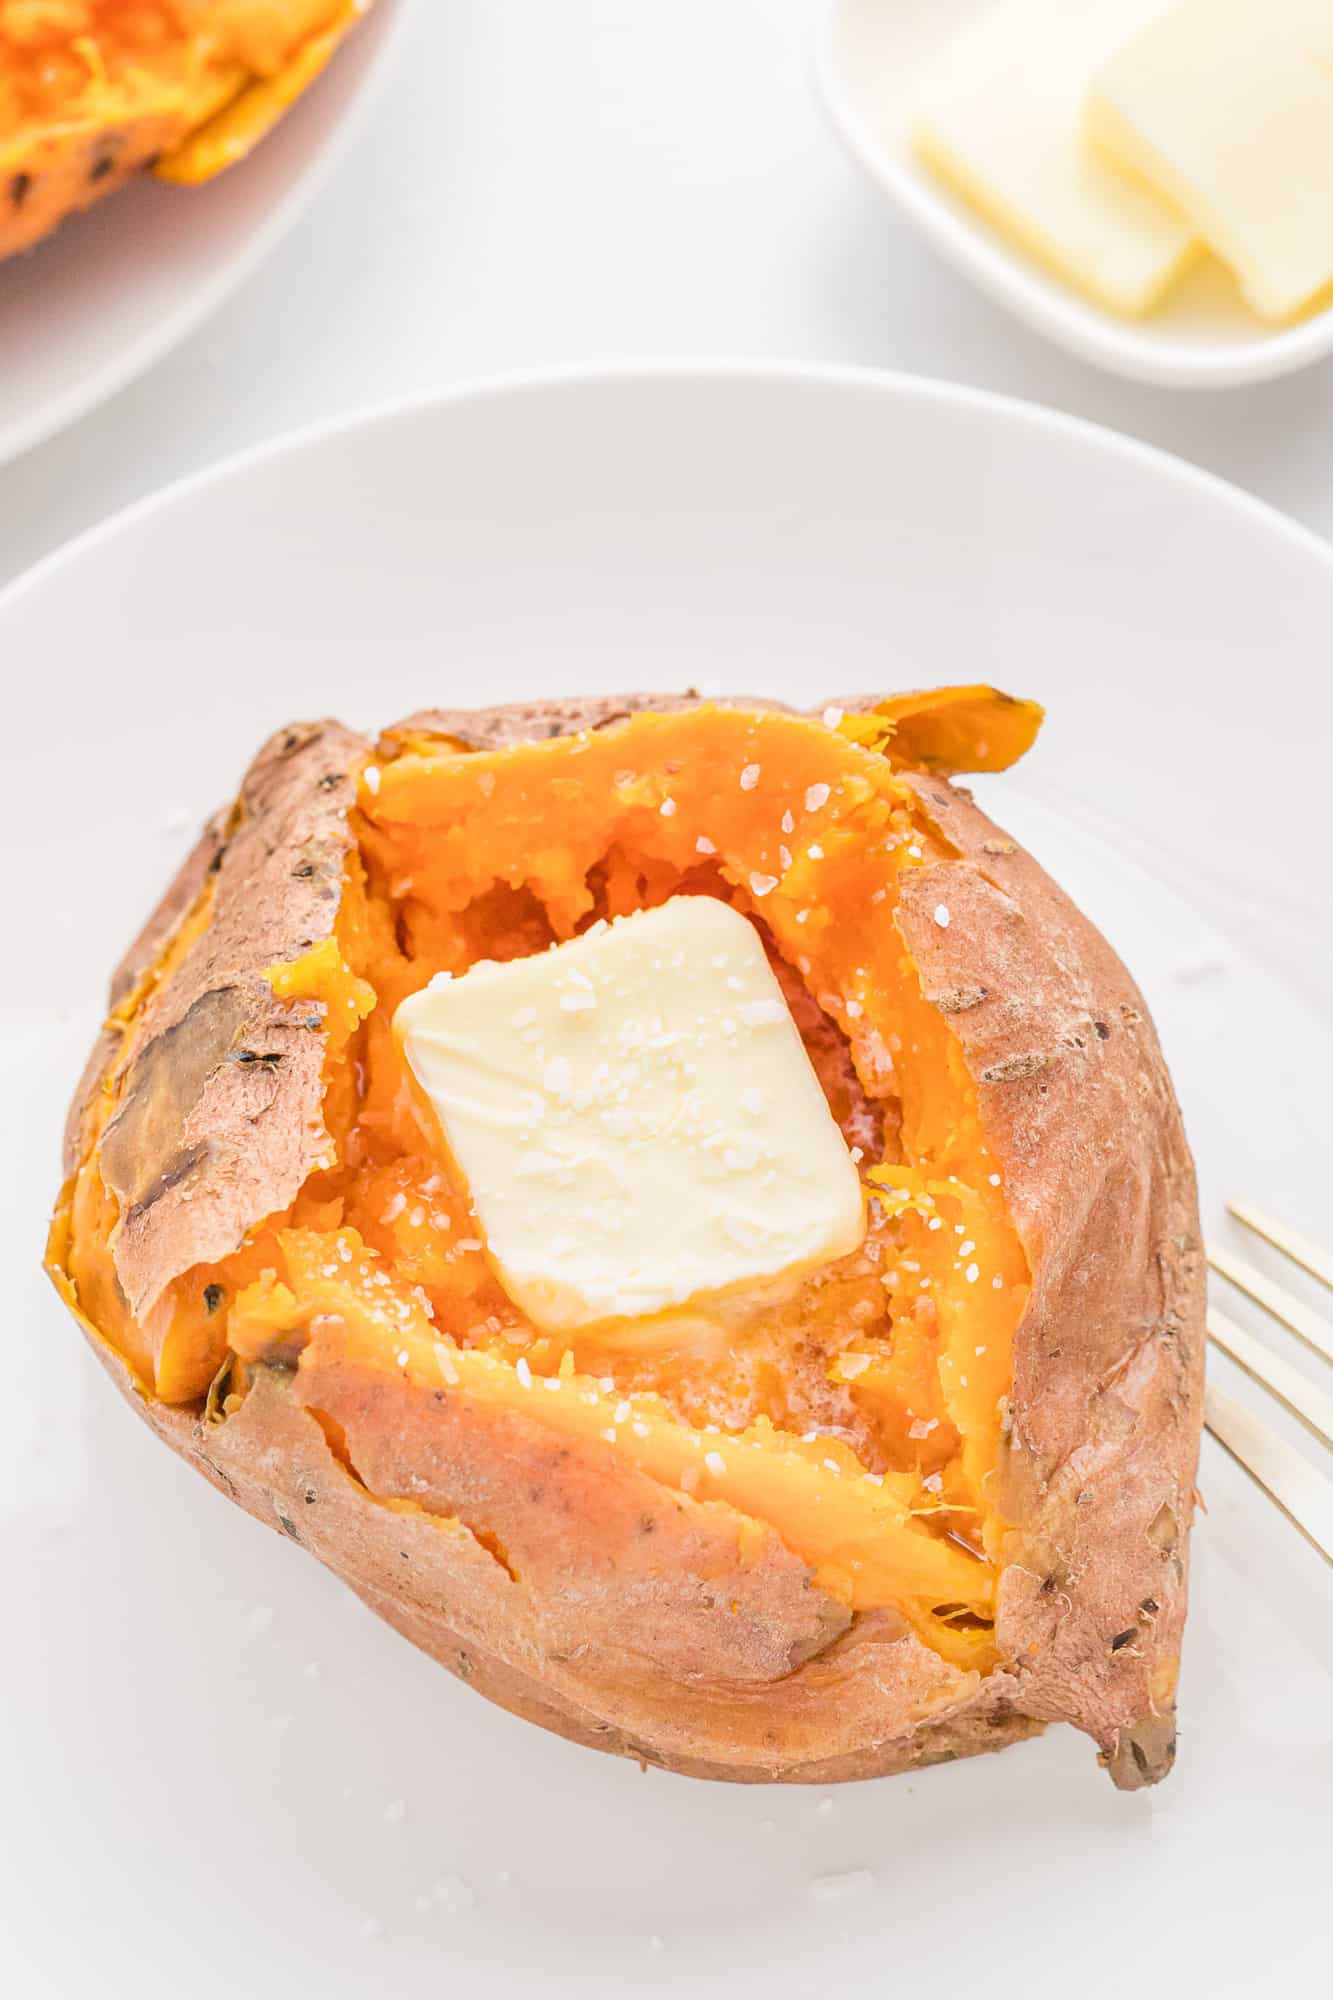 Perfectly cooked instant pot sweet potato.